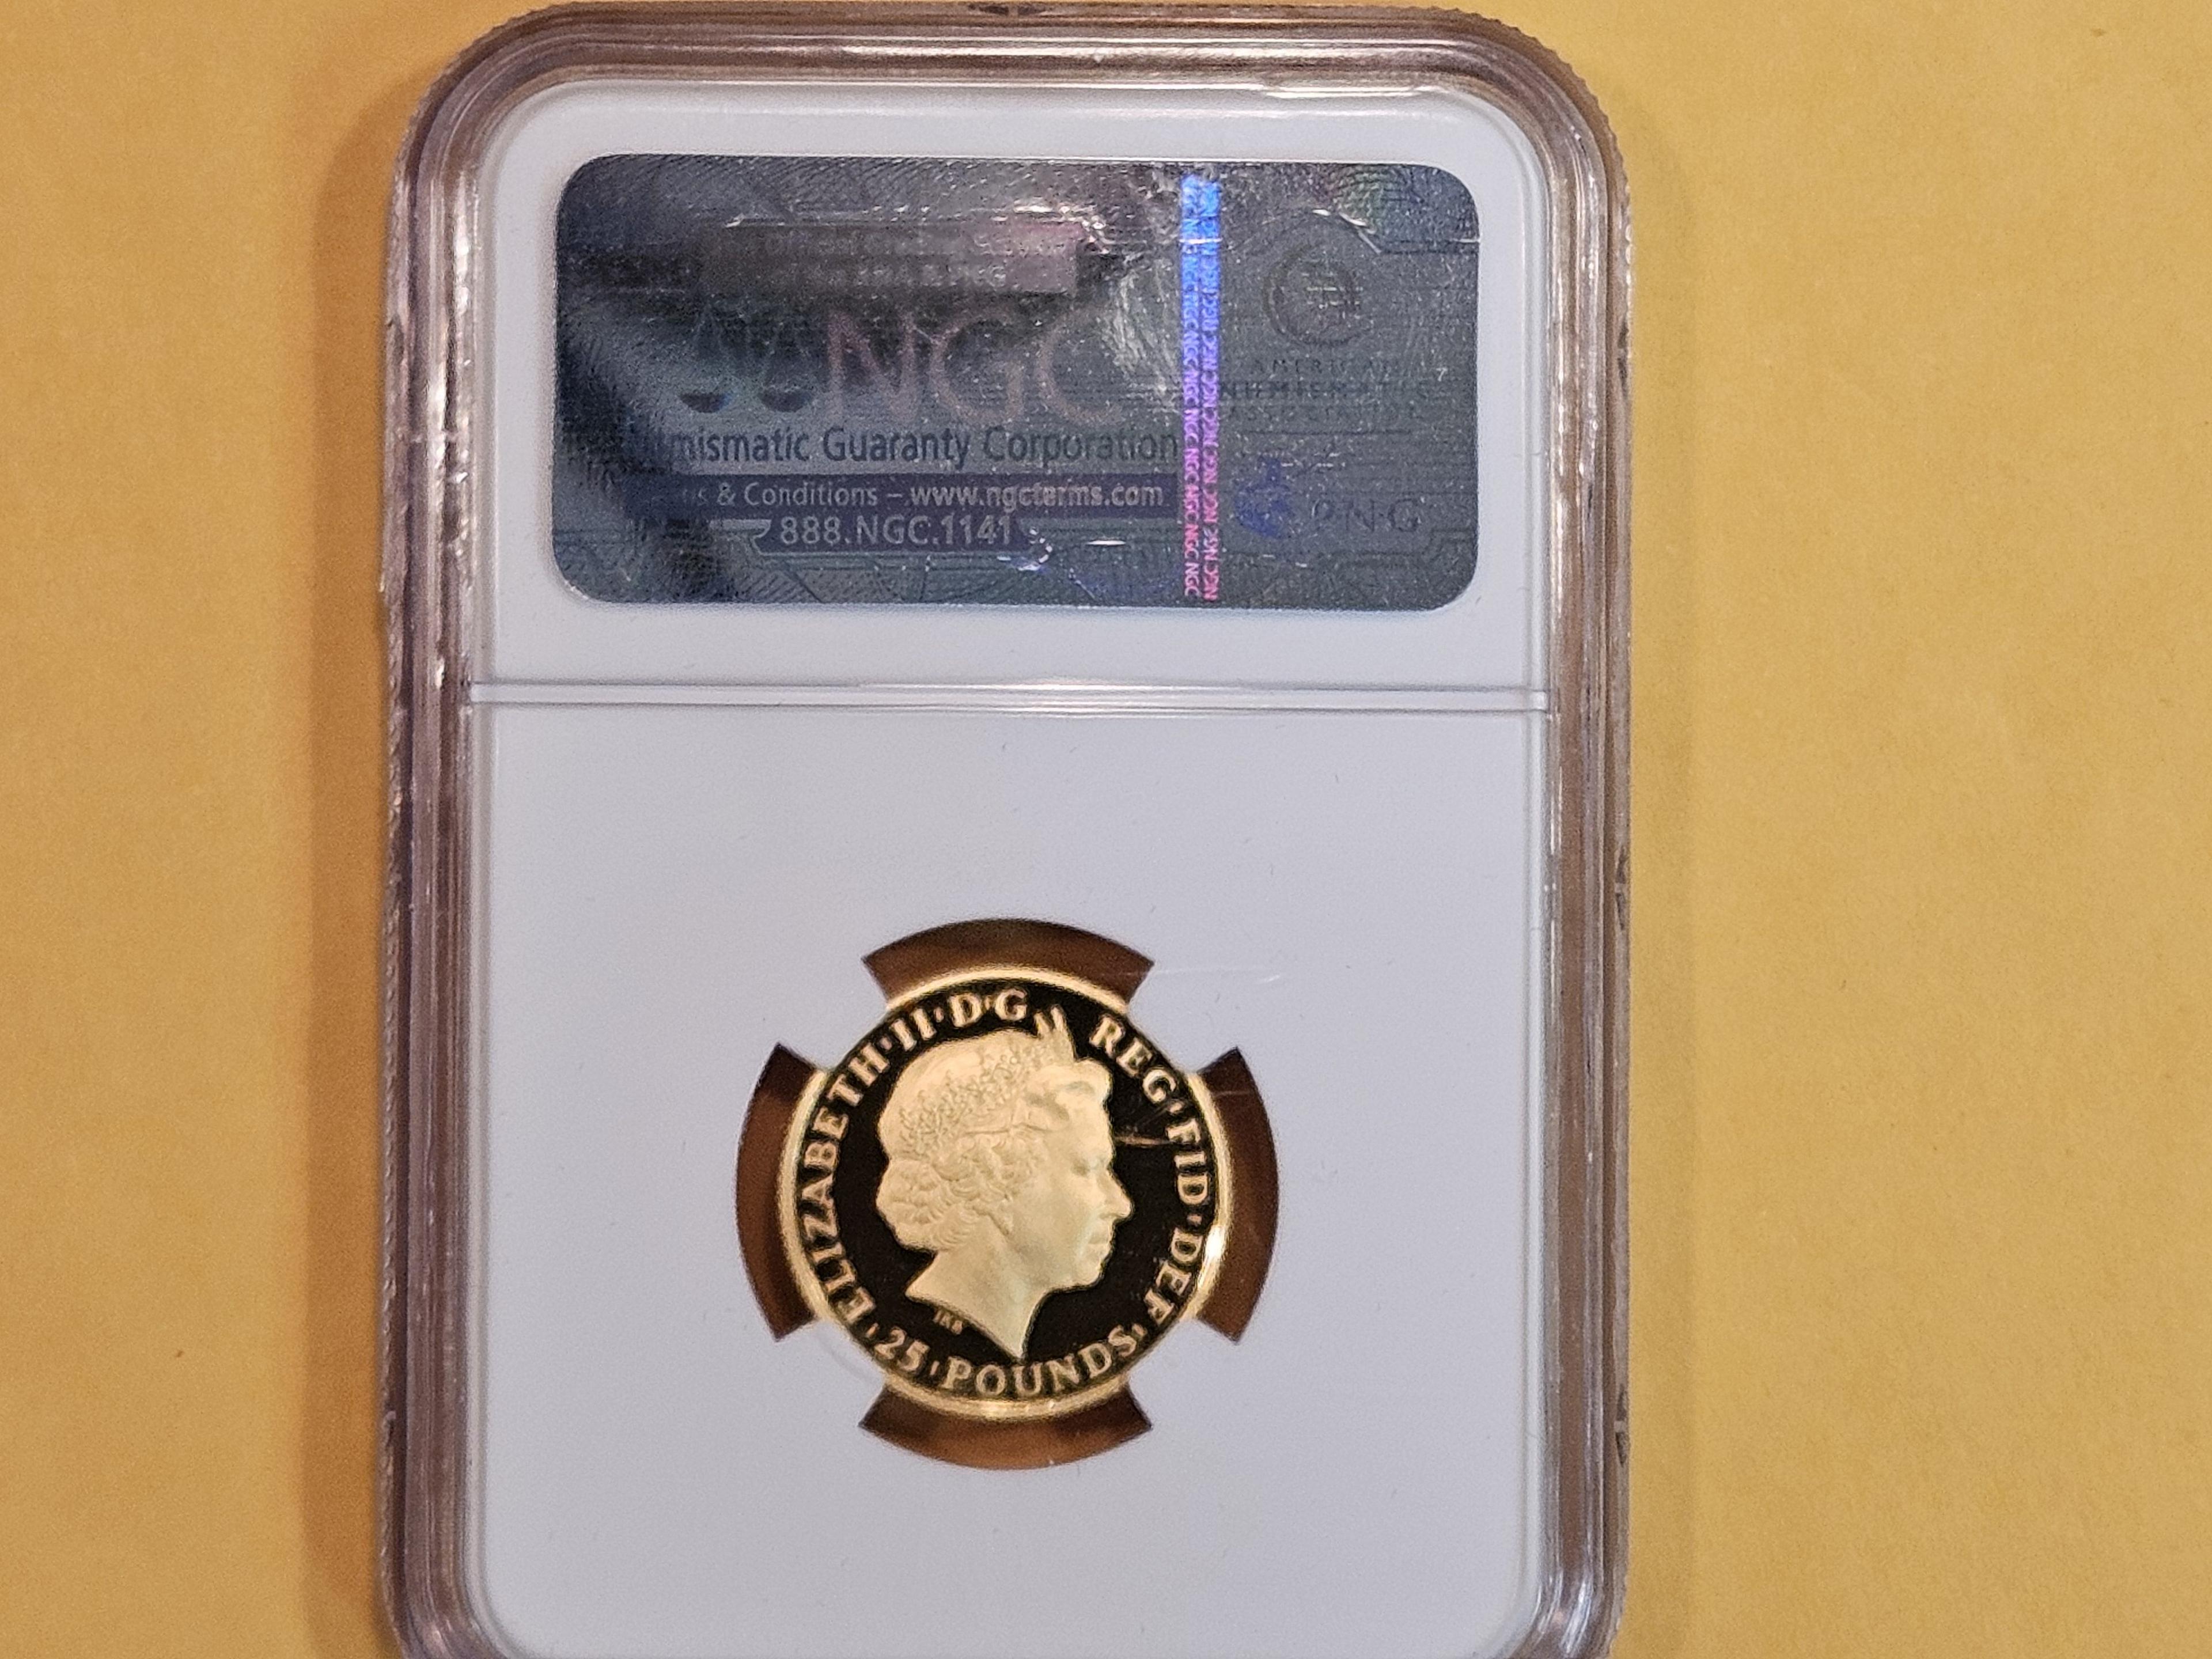 PERFECT GOLD! NGC 2014 Great Britain Gold 25 Pounds in Proof 70 Ultra Cameo